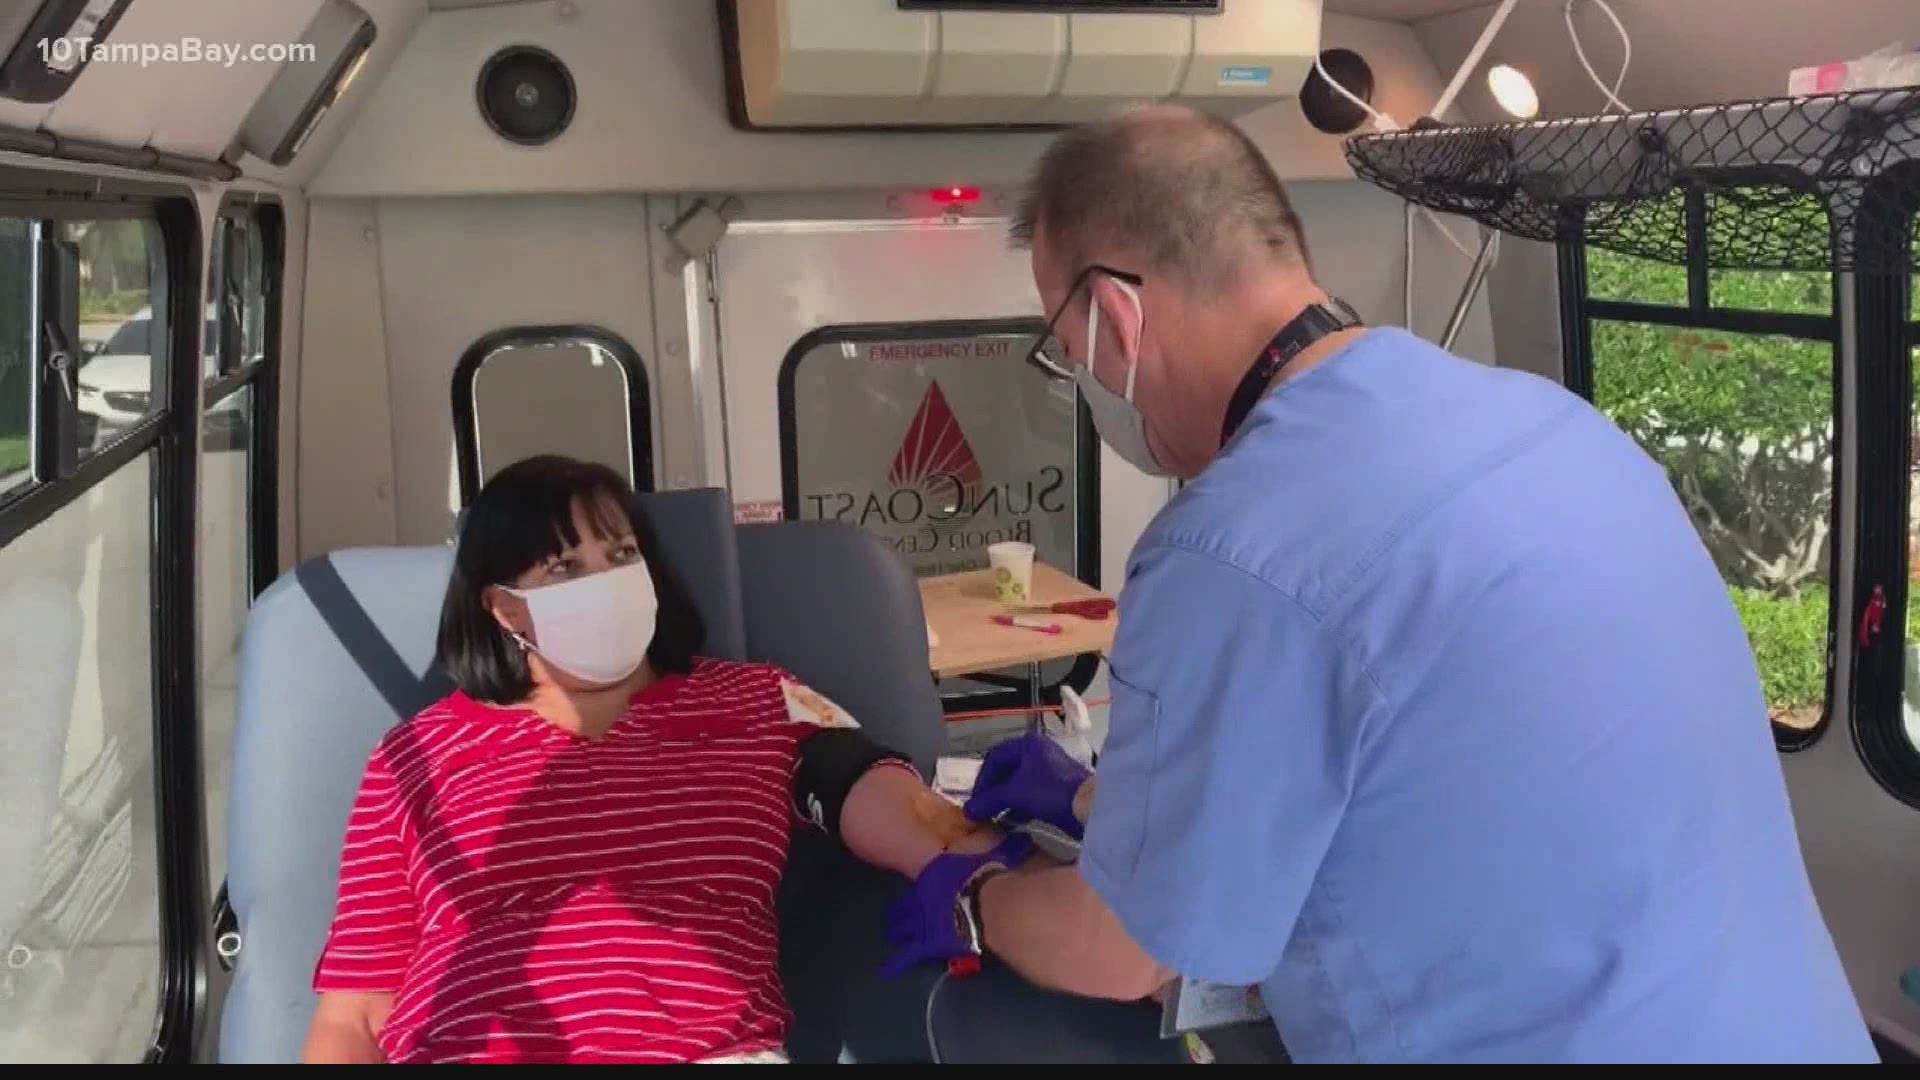 Want to donate blood? SunCoast Blood Centers will come straight to you in new mini-buses.